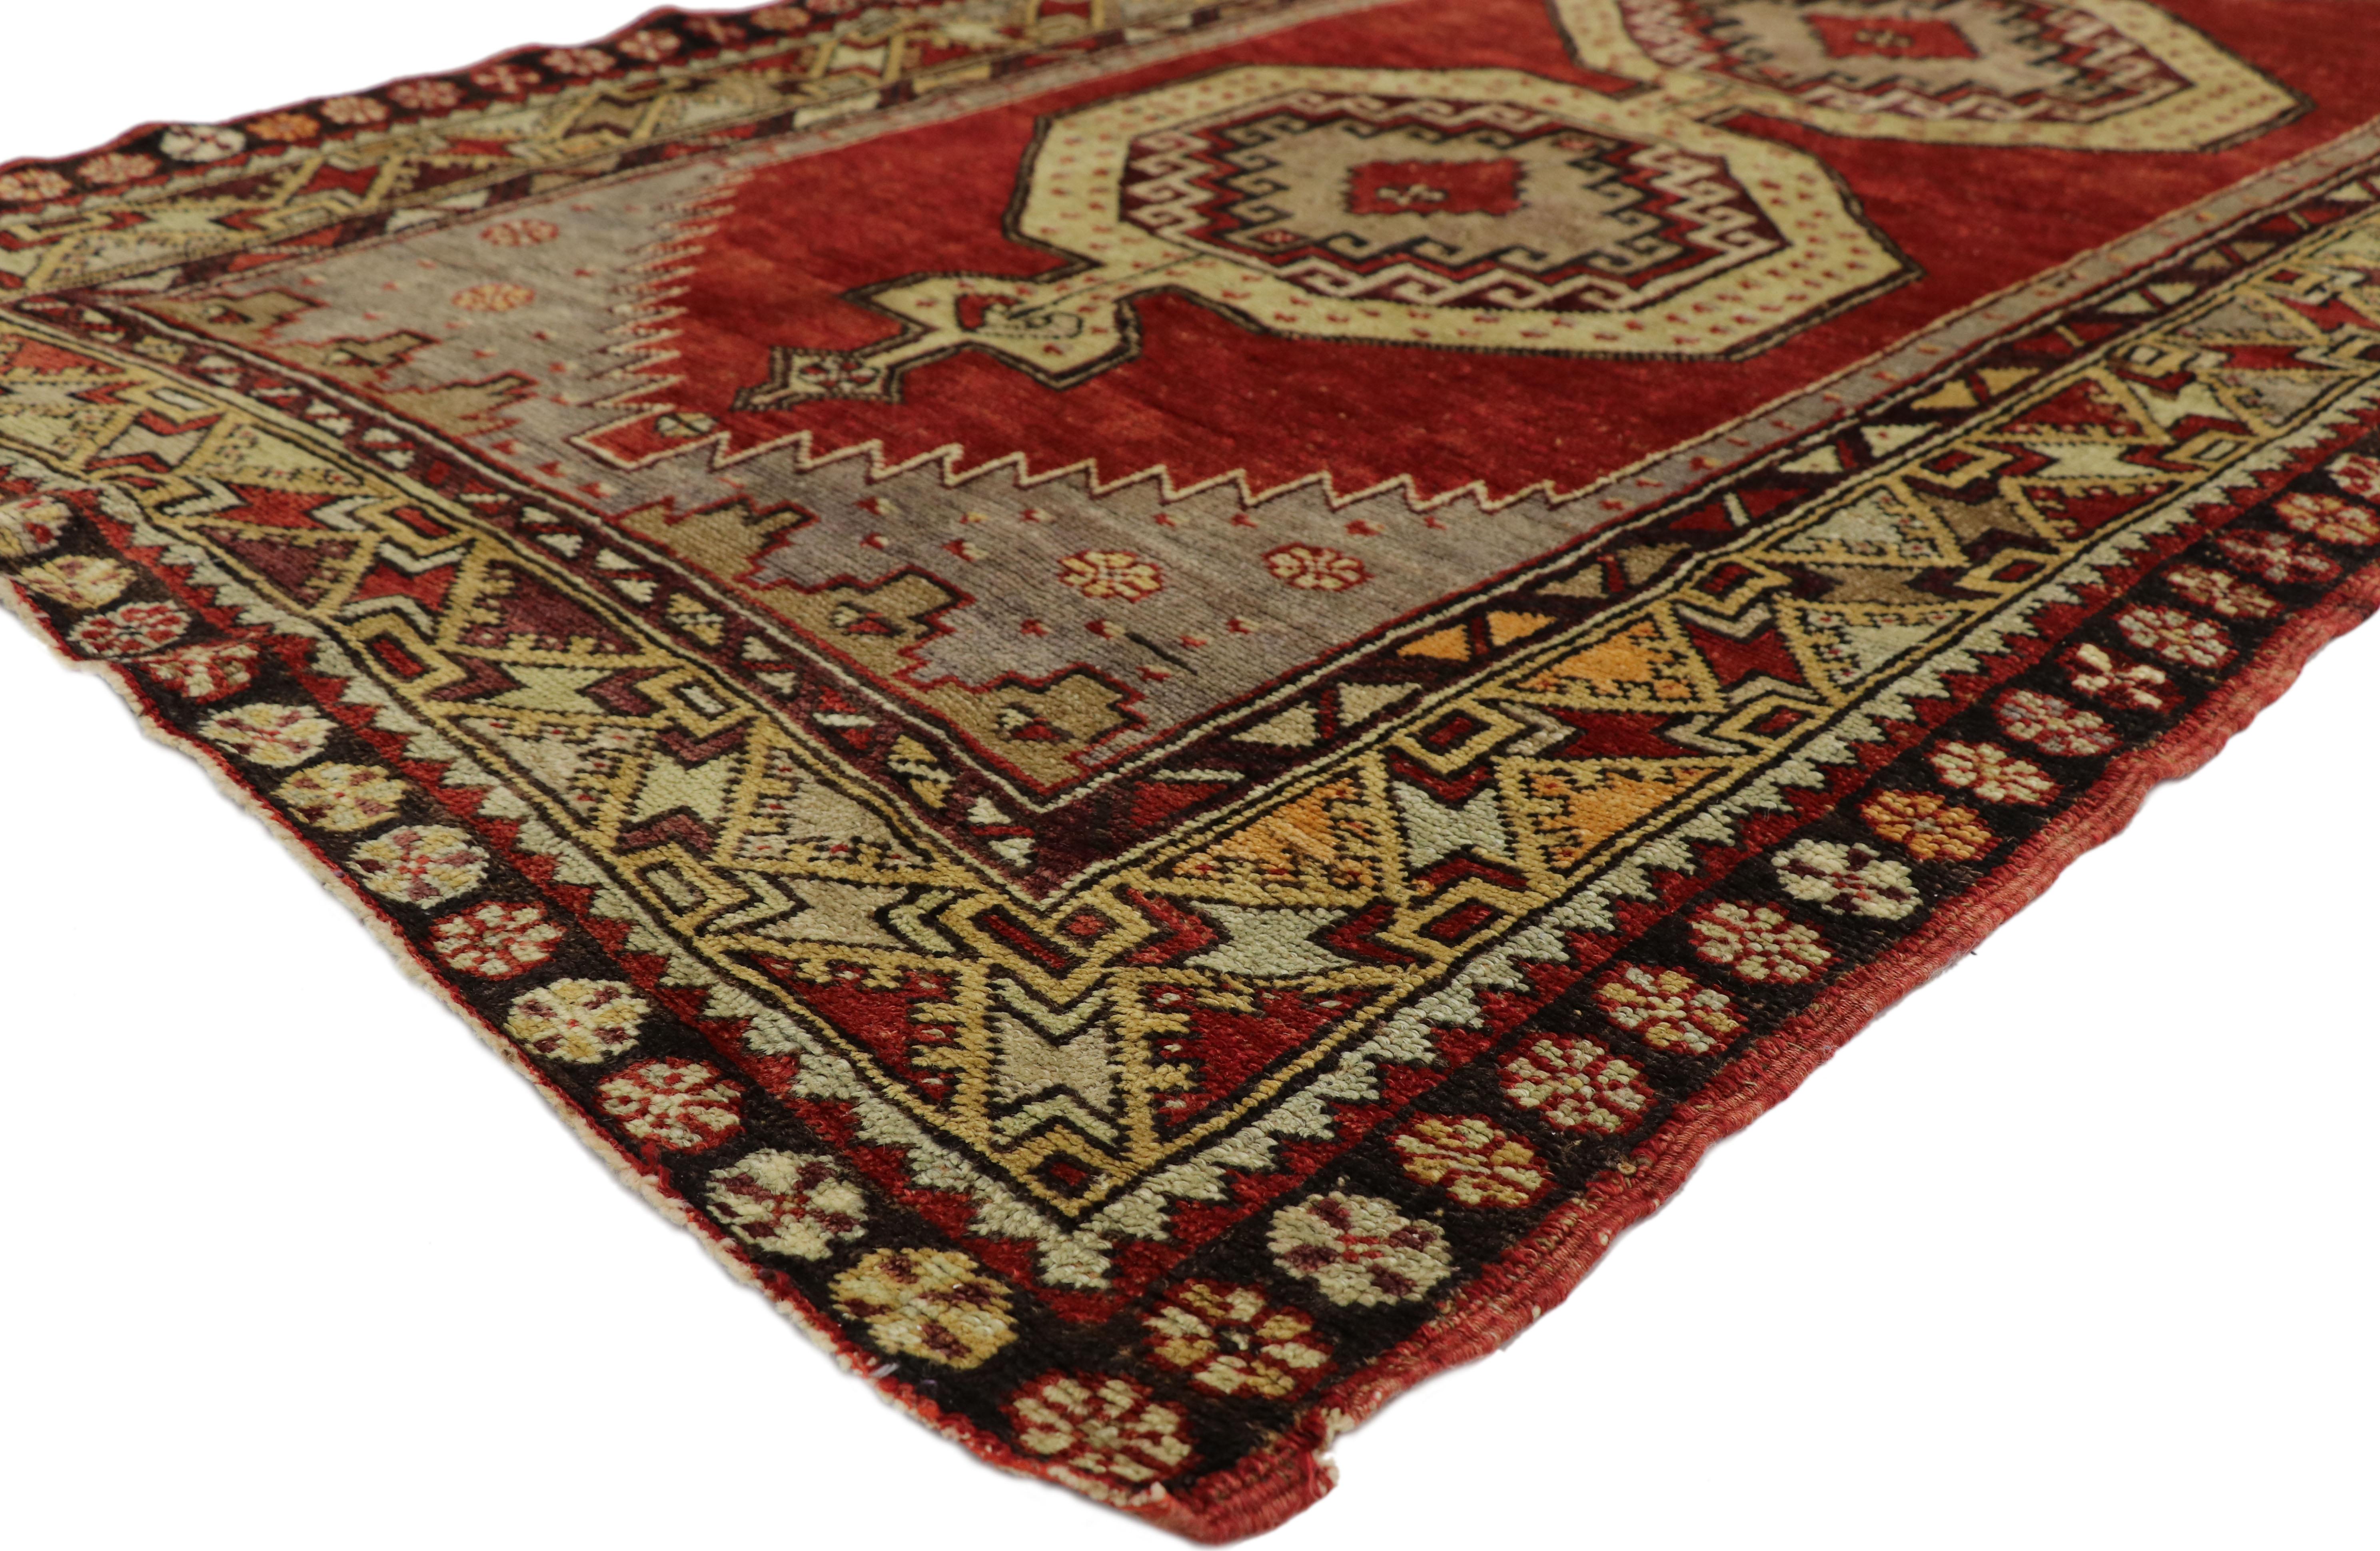 51808 Vintage Turkish Oushak Runner with Mid-Century Modern Style 03'09 X 10'08. This hand-knotted wool tribal style Oushak runner features four intricate rod amulets each filled with a garnet diamond centre and contrasting onyx tarantula borders.